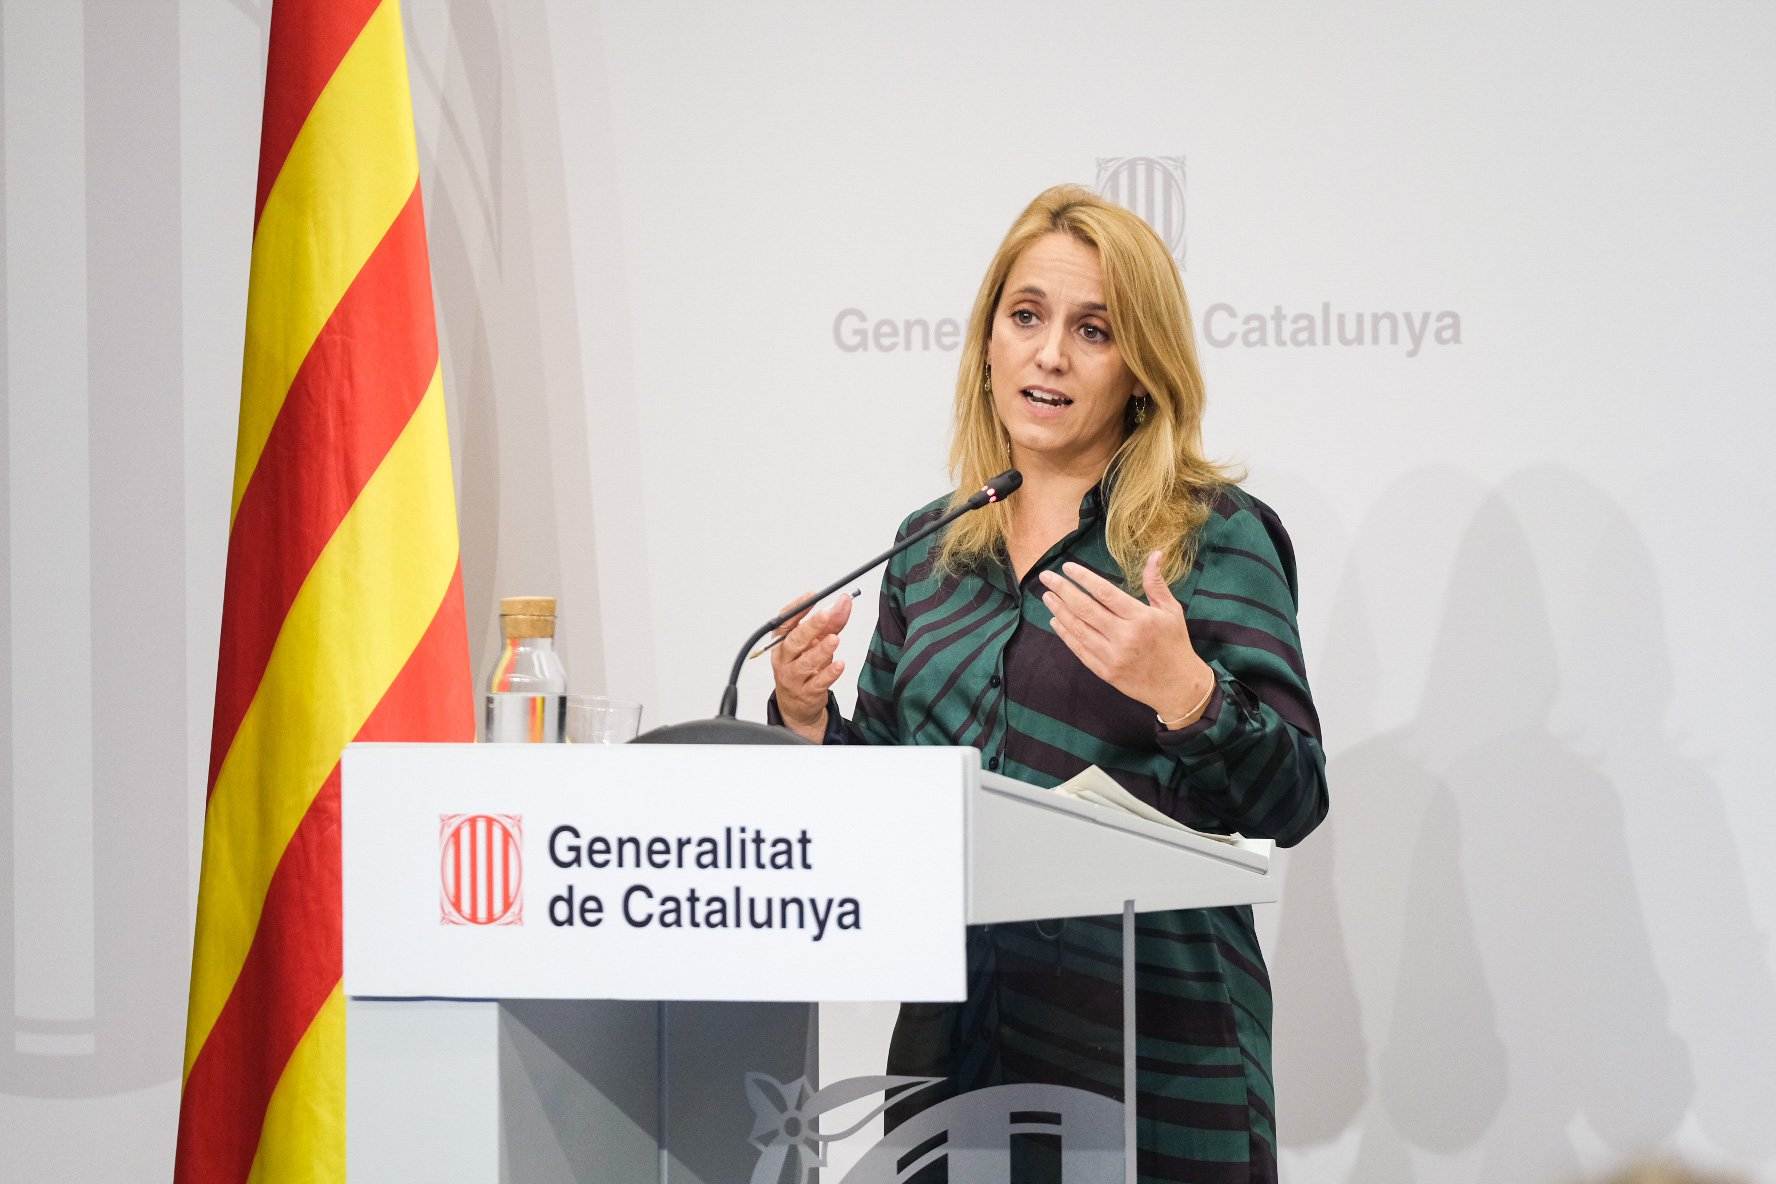 Catalonia's fiscal deficit with the Spanish state reached 22 billion euros in 2021